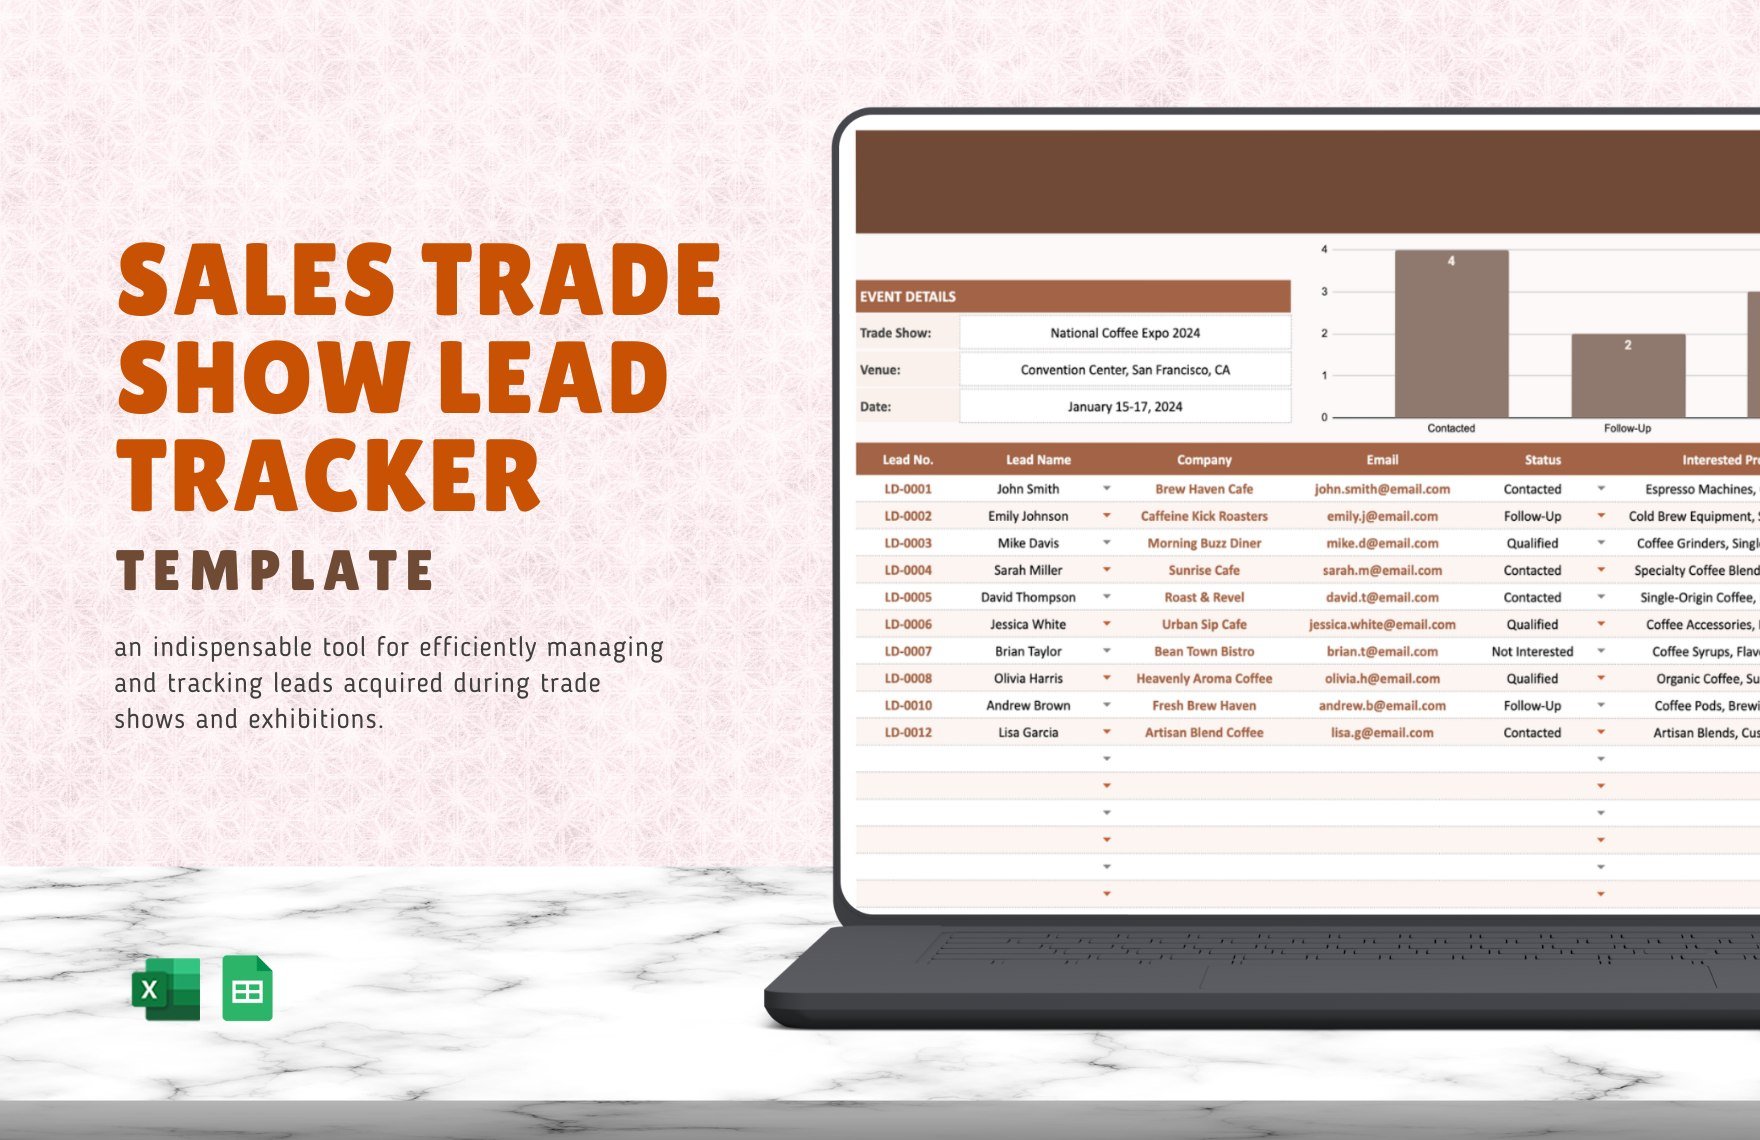 Sales Trade Show Lead Tracker Template in Excel, Google Sheets